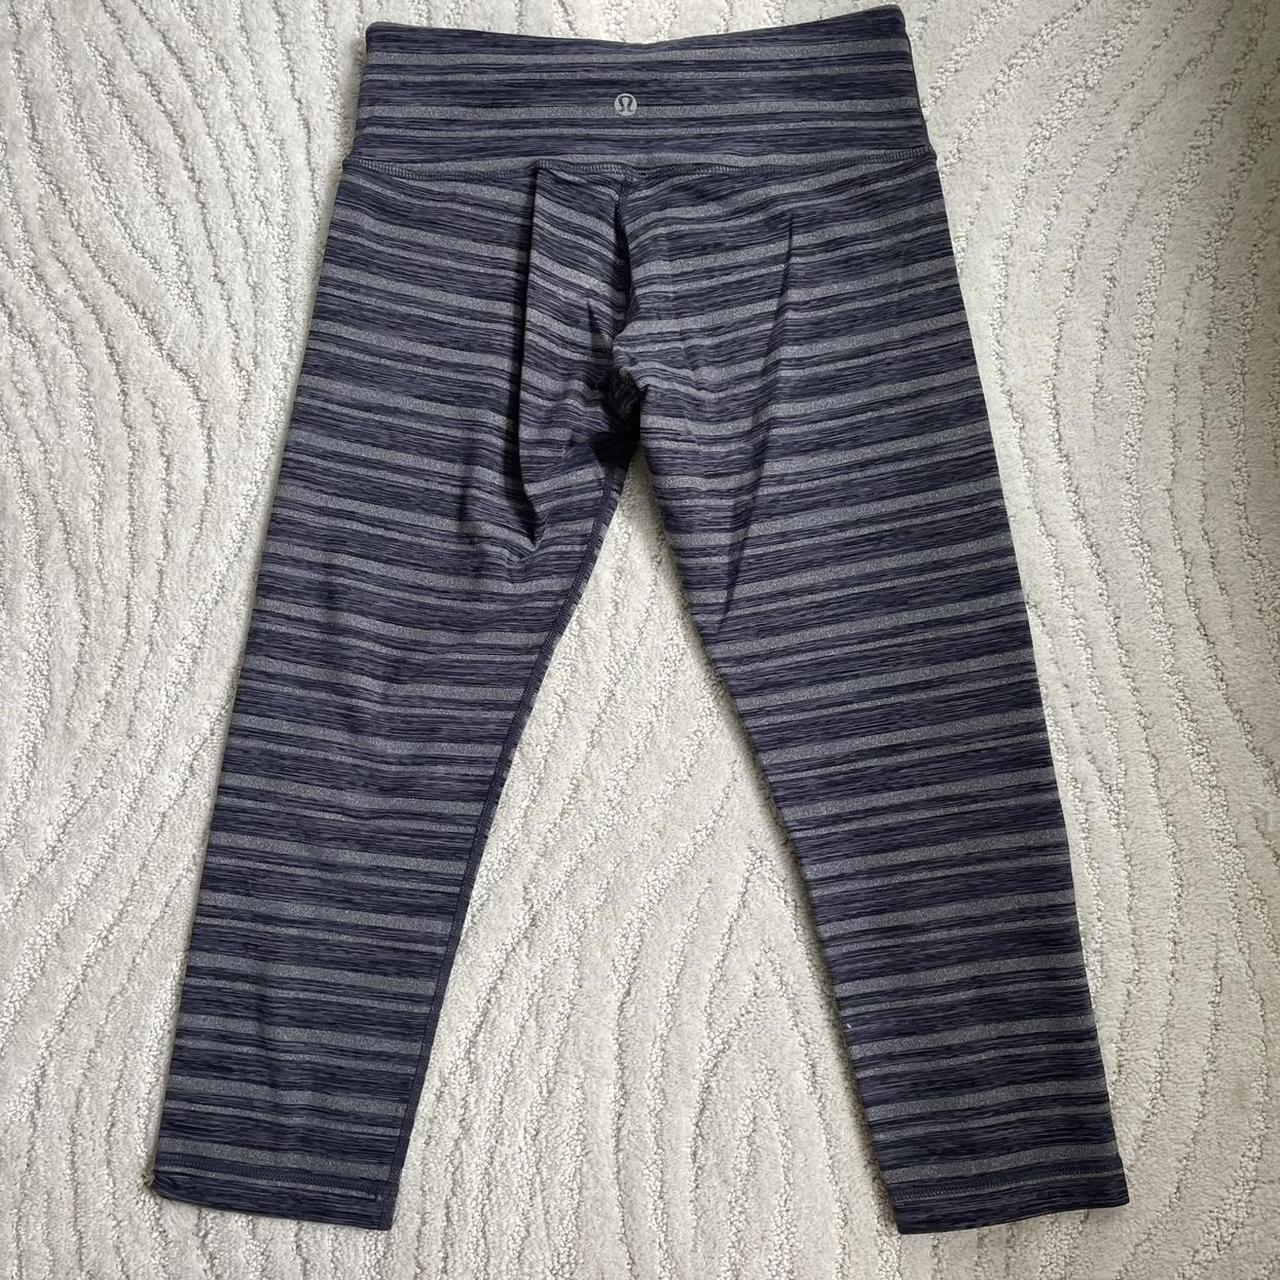 LULULEMON green striped leggings size 6! these are - Depop